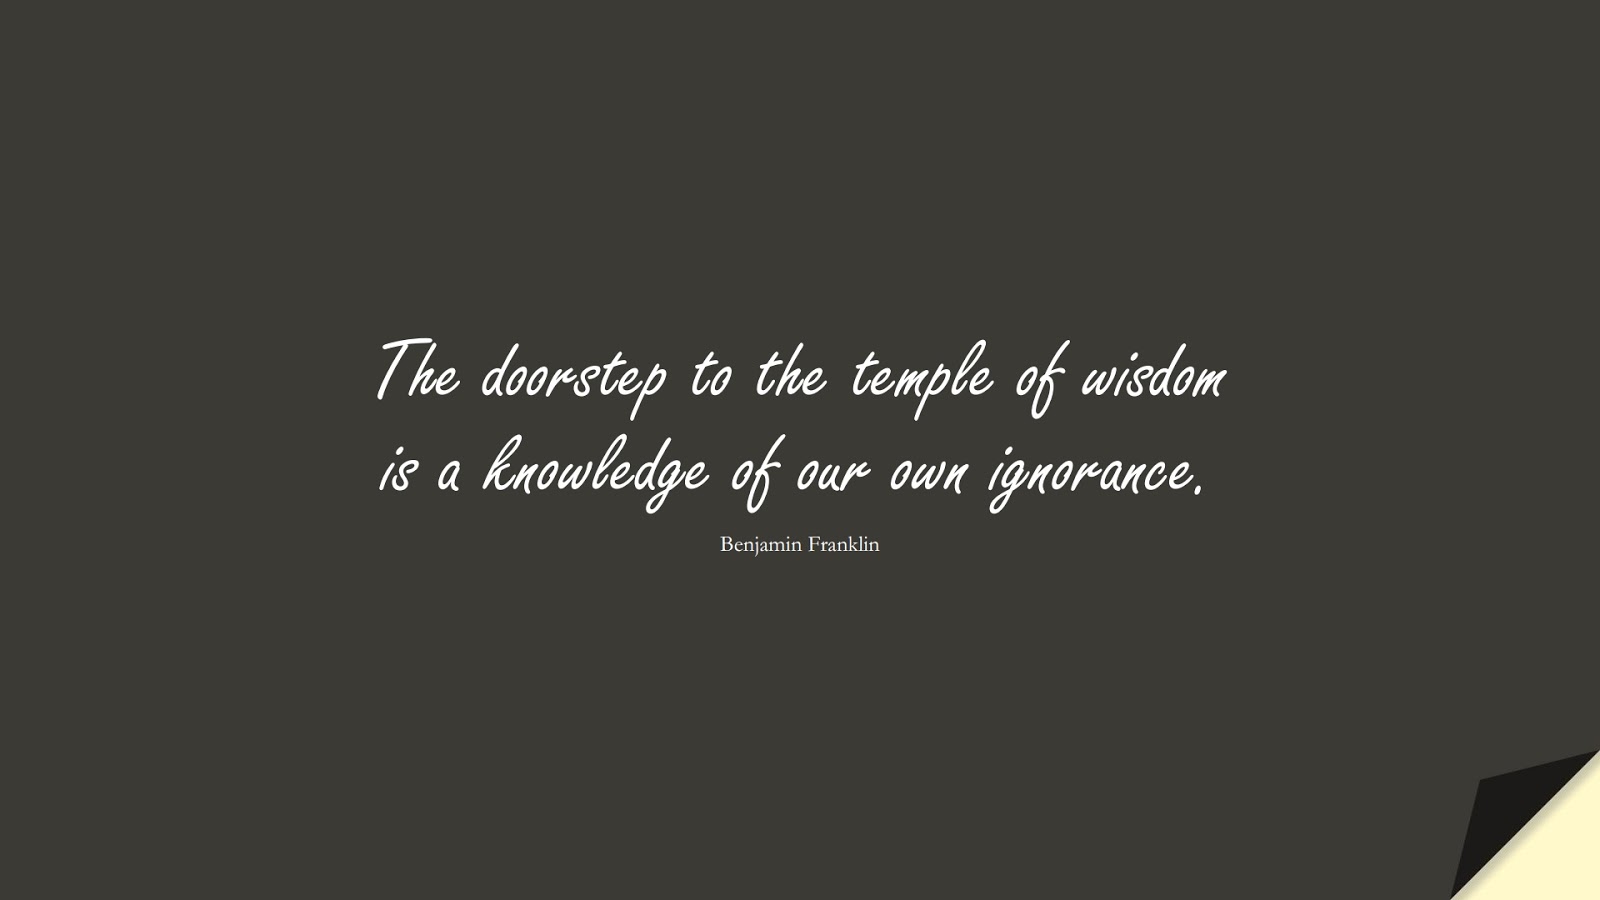 The doorstep to the temple of wisdom is a knowledge of our own ignorance. (Benjamin Franklin);  #WordsofWisdom